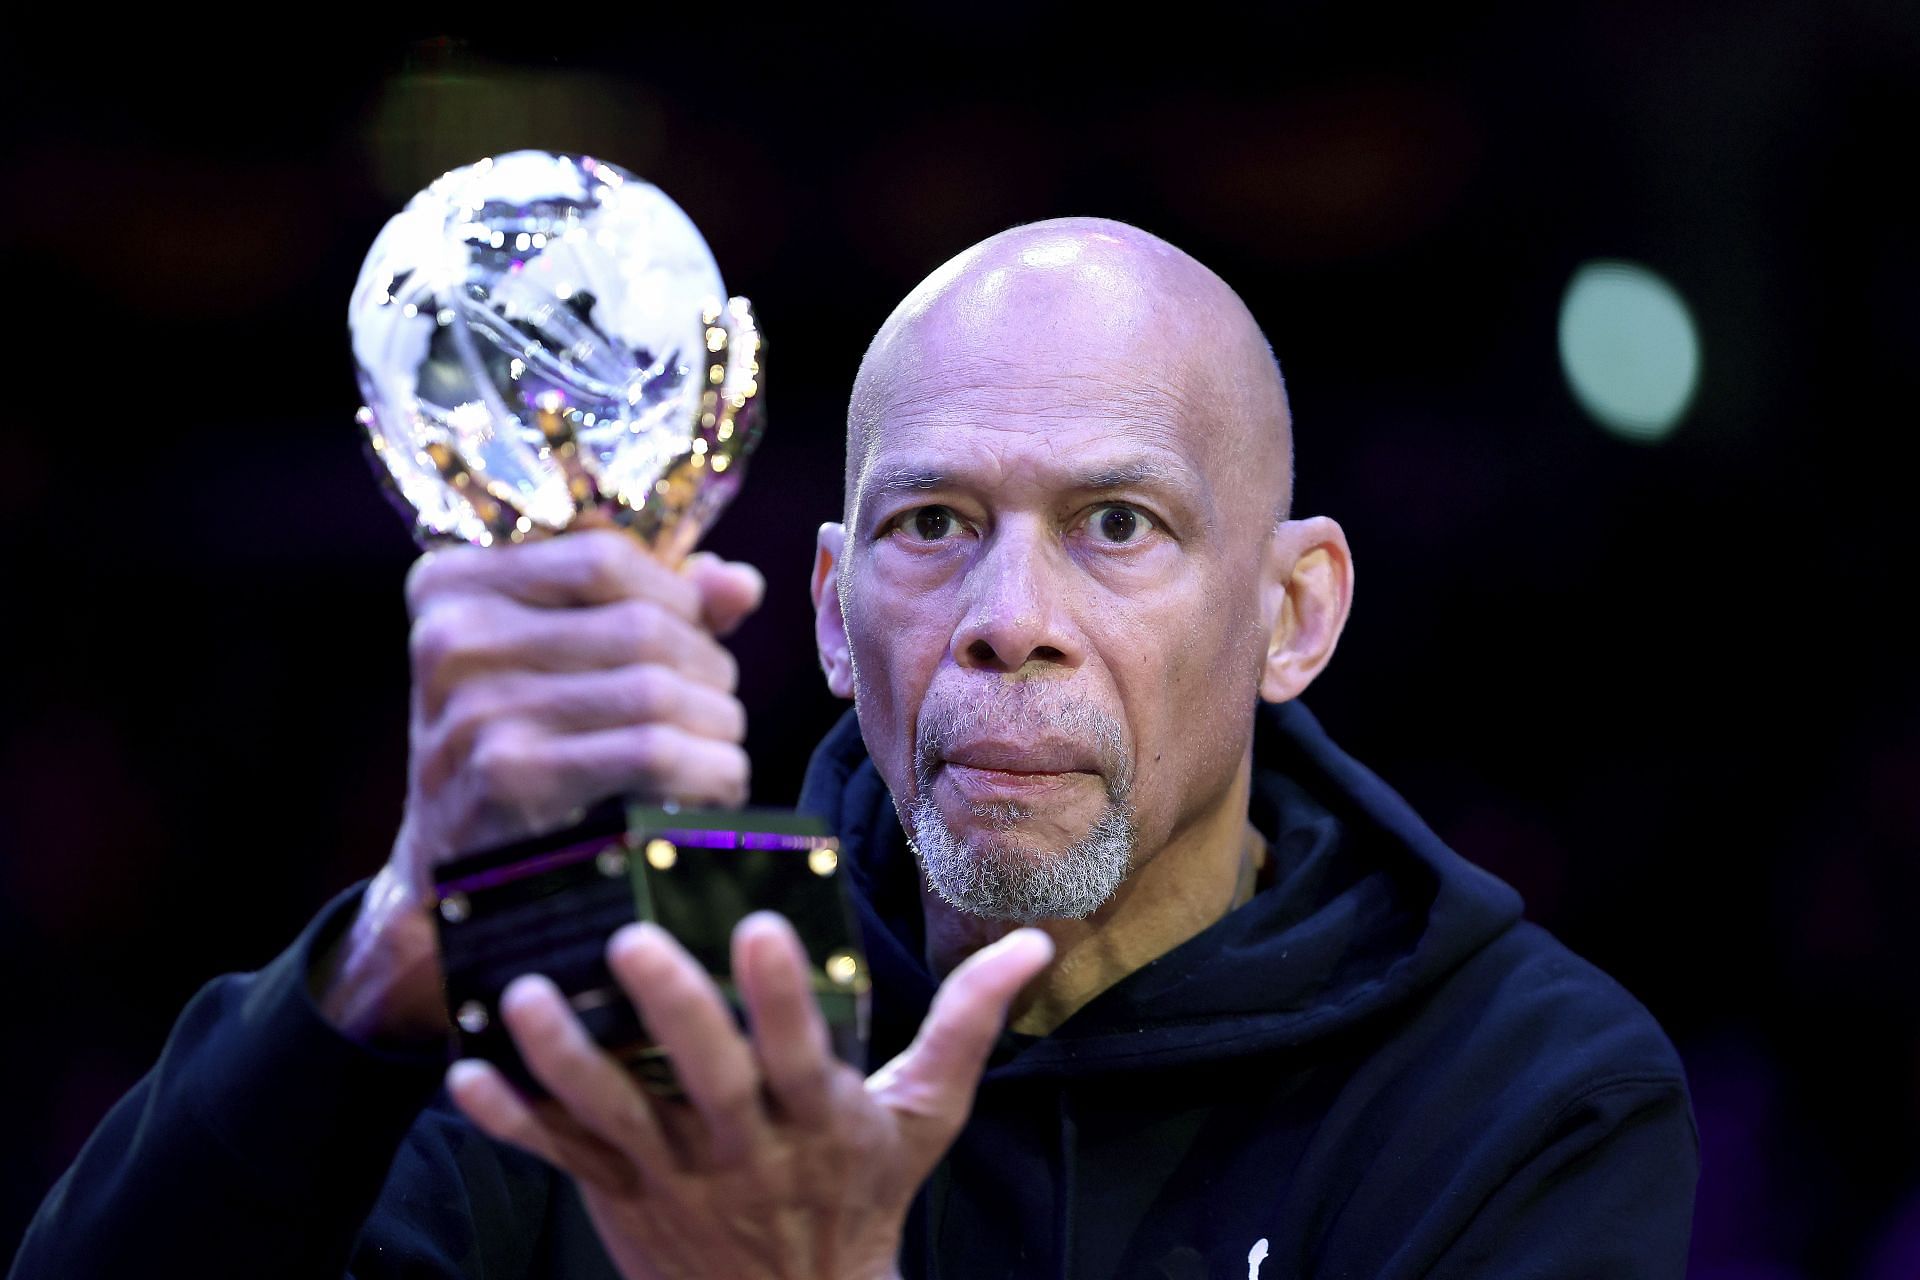 Abdul-Jabbar gives his take on the debate over the greatest player of all time.